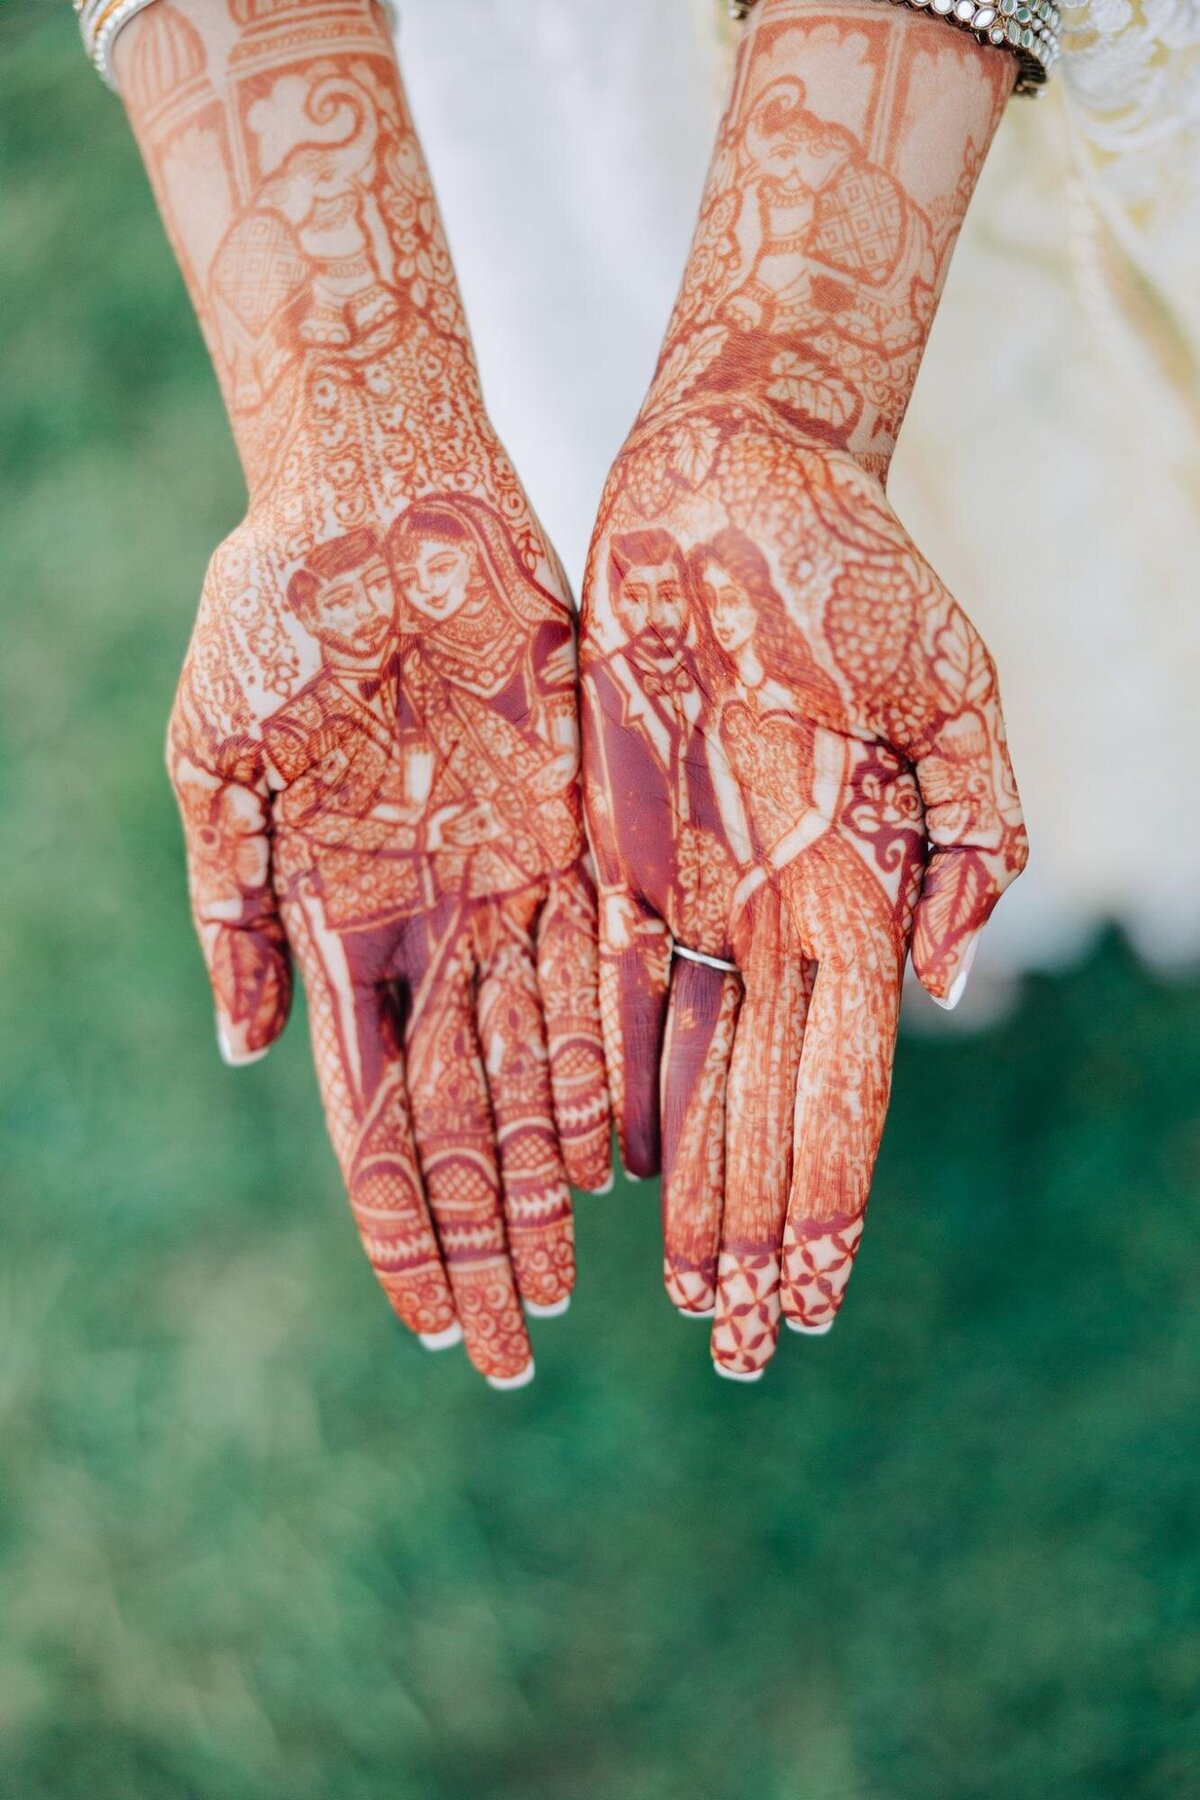 A person showcasing intricate henna designs on their hands, including a depiction of a couple.